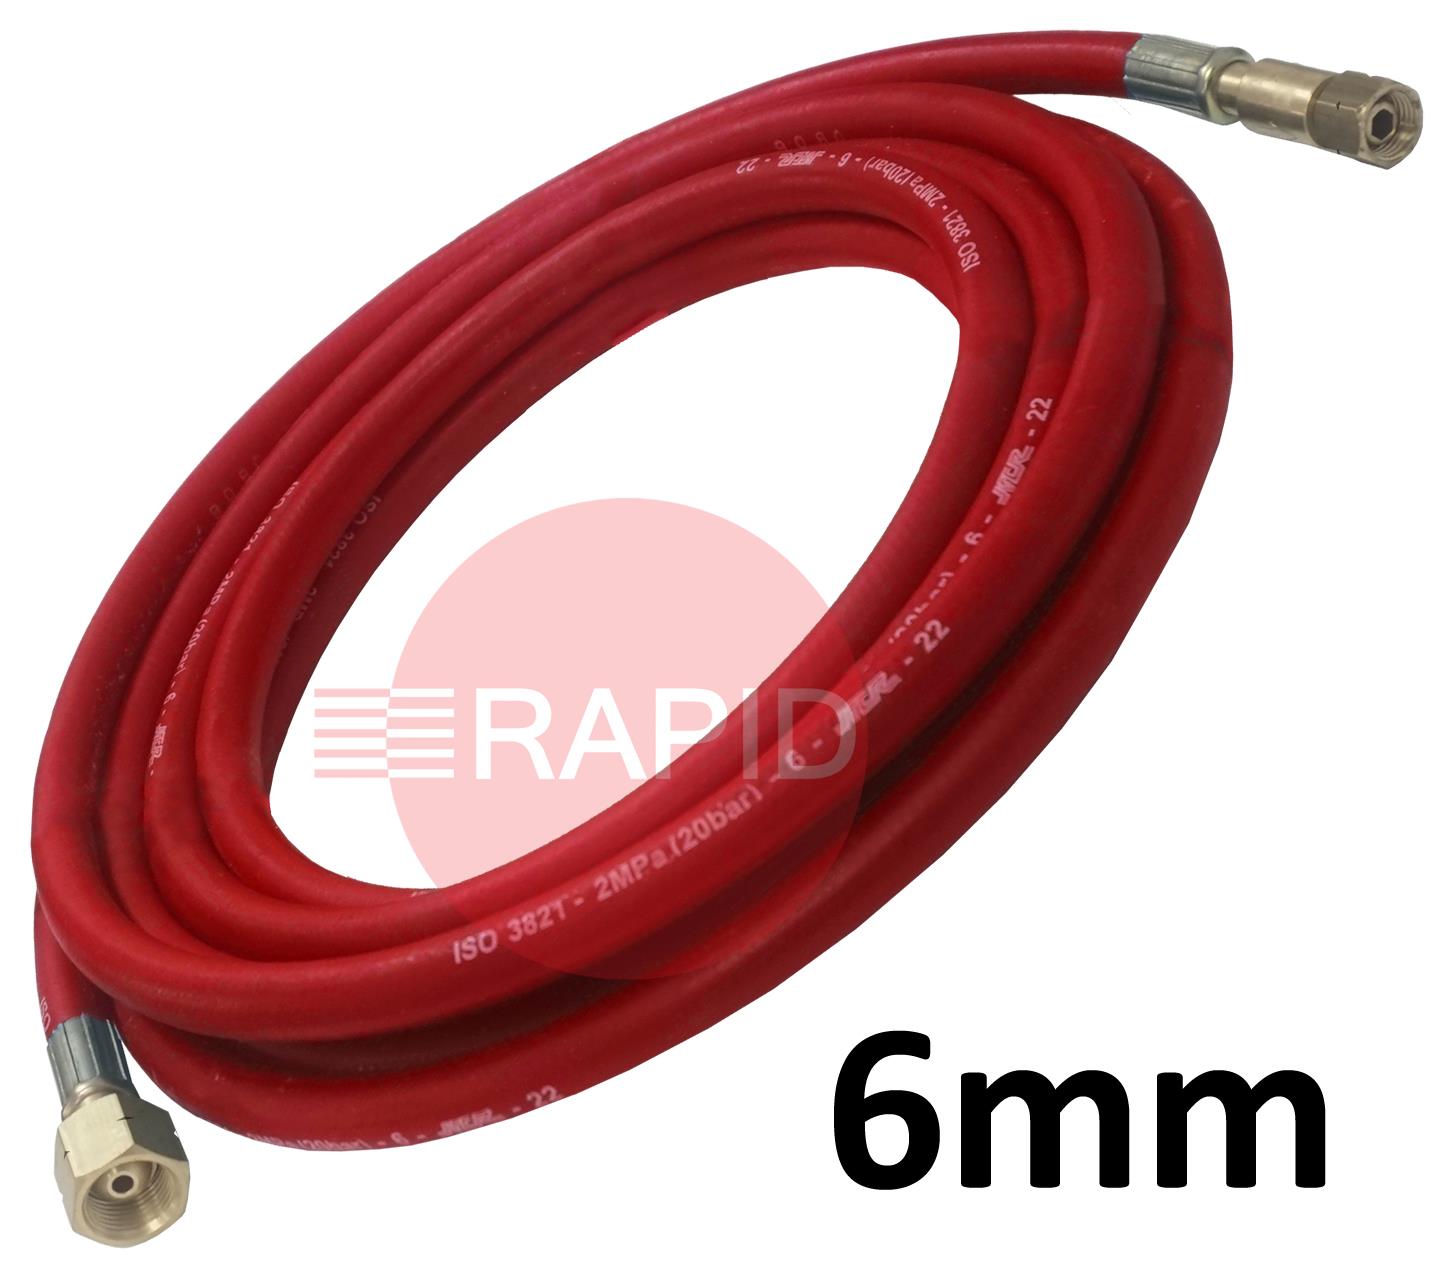 ACYLTHOSE6MM  Fitted Acetylene Hose. 6mm Bore. G1/4 Check Valve & G3/8 Regulator Connection